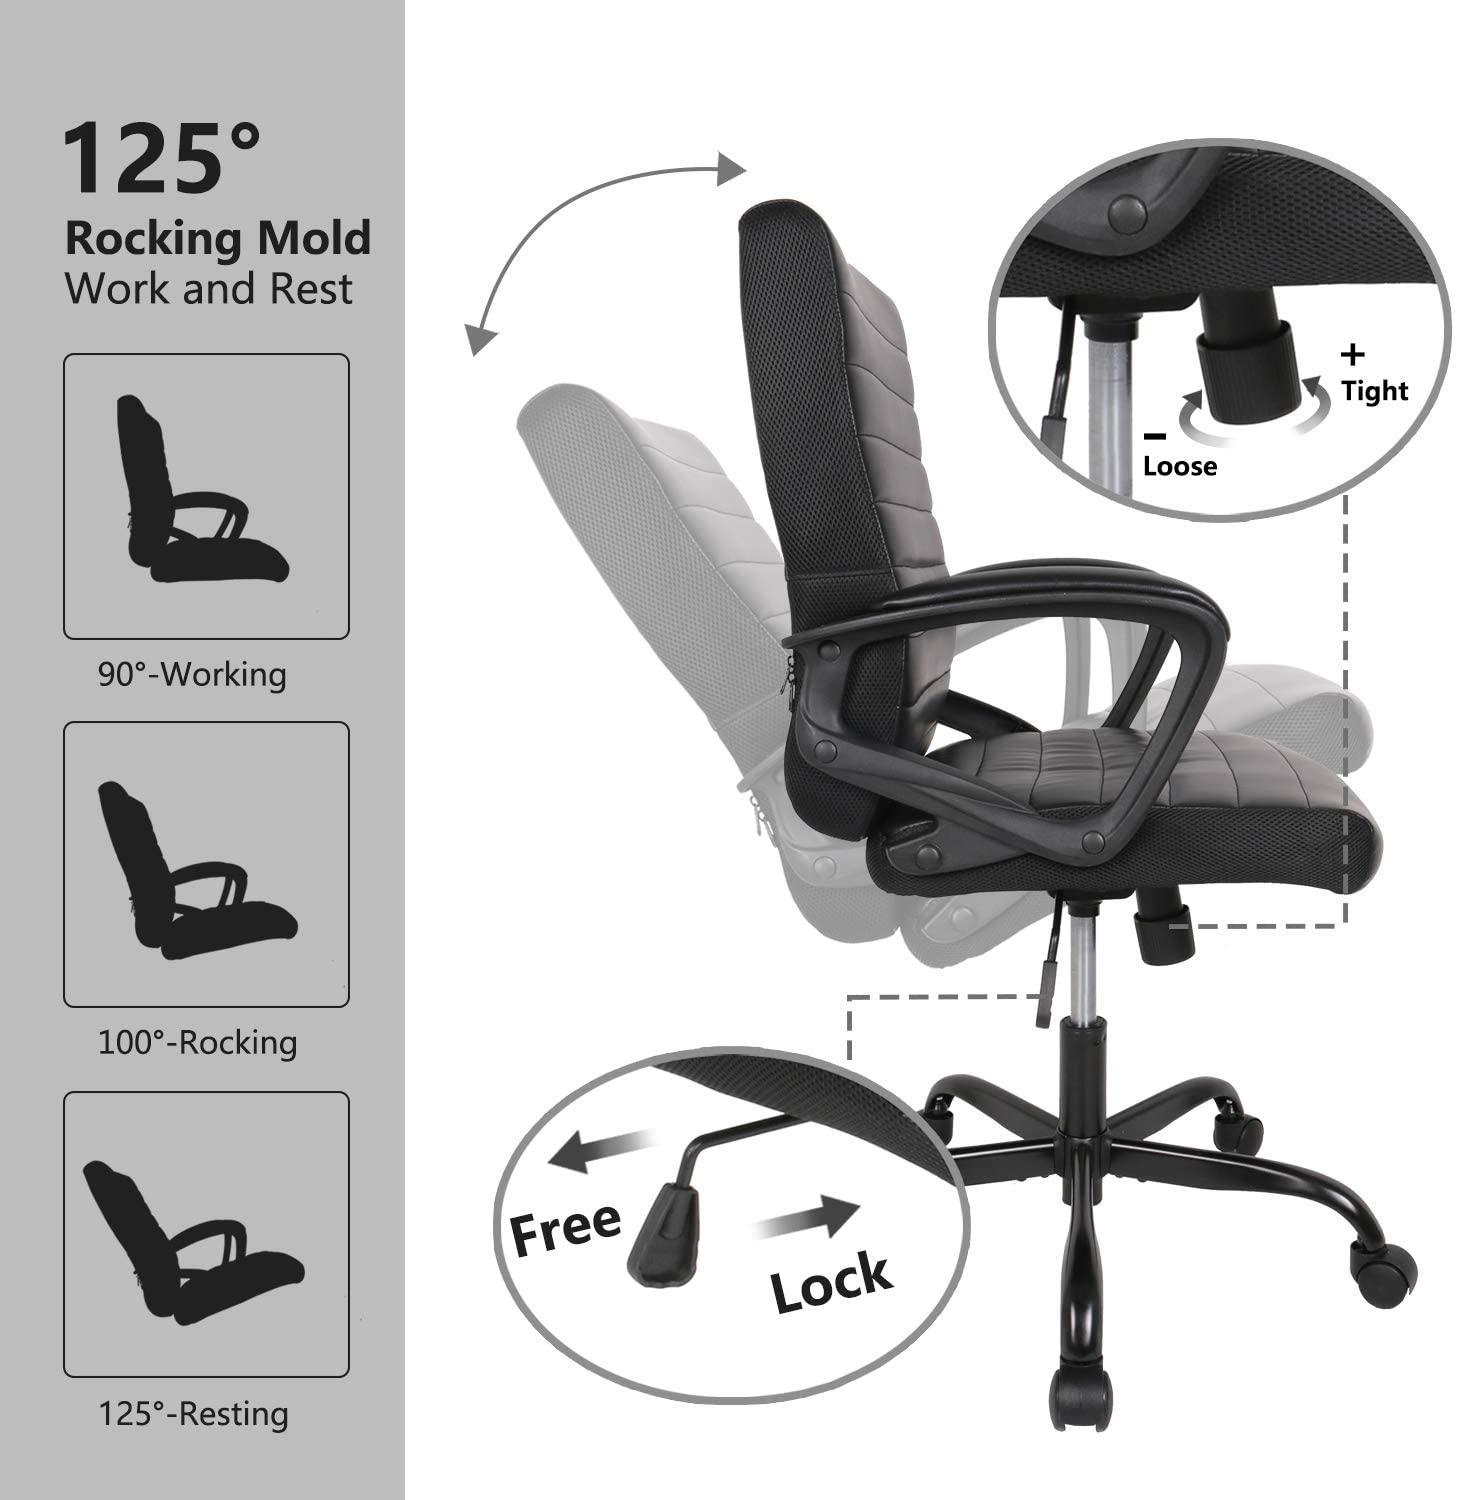 Ergonomic Bonded Leather Executive Computer Task Chairs for Home Office Conference Room